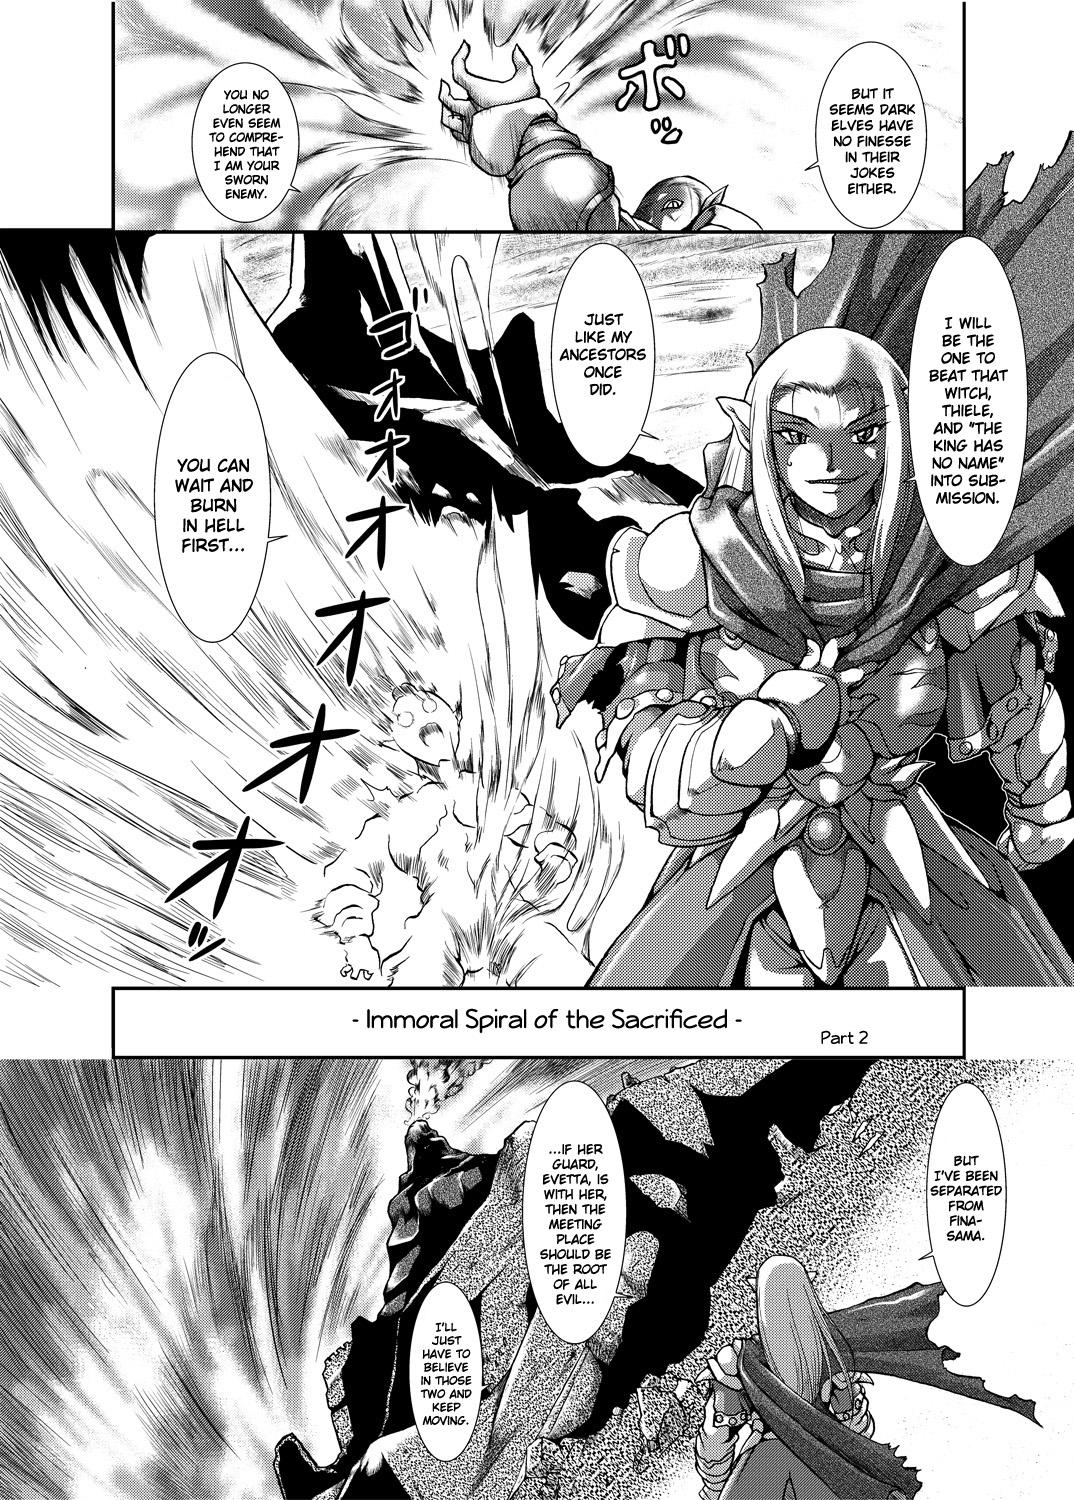 Pussy Fucking Kakugee Zanmai 7 | Spiral of Conflict 2 - Chaos breaker Old And Young - Page 5